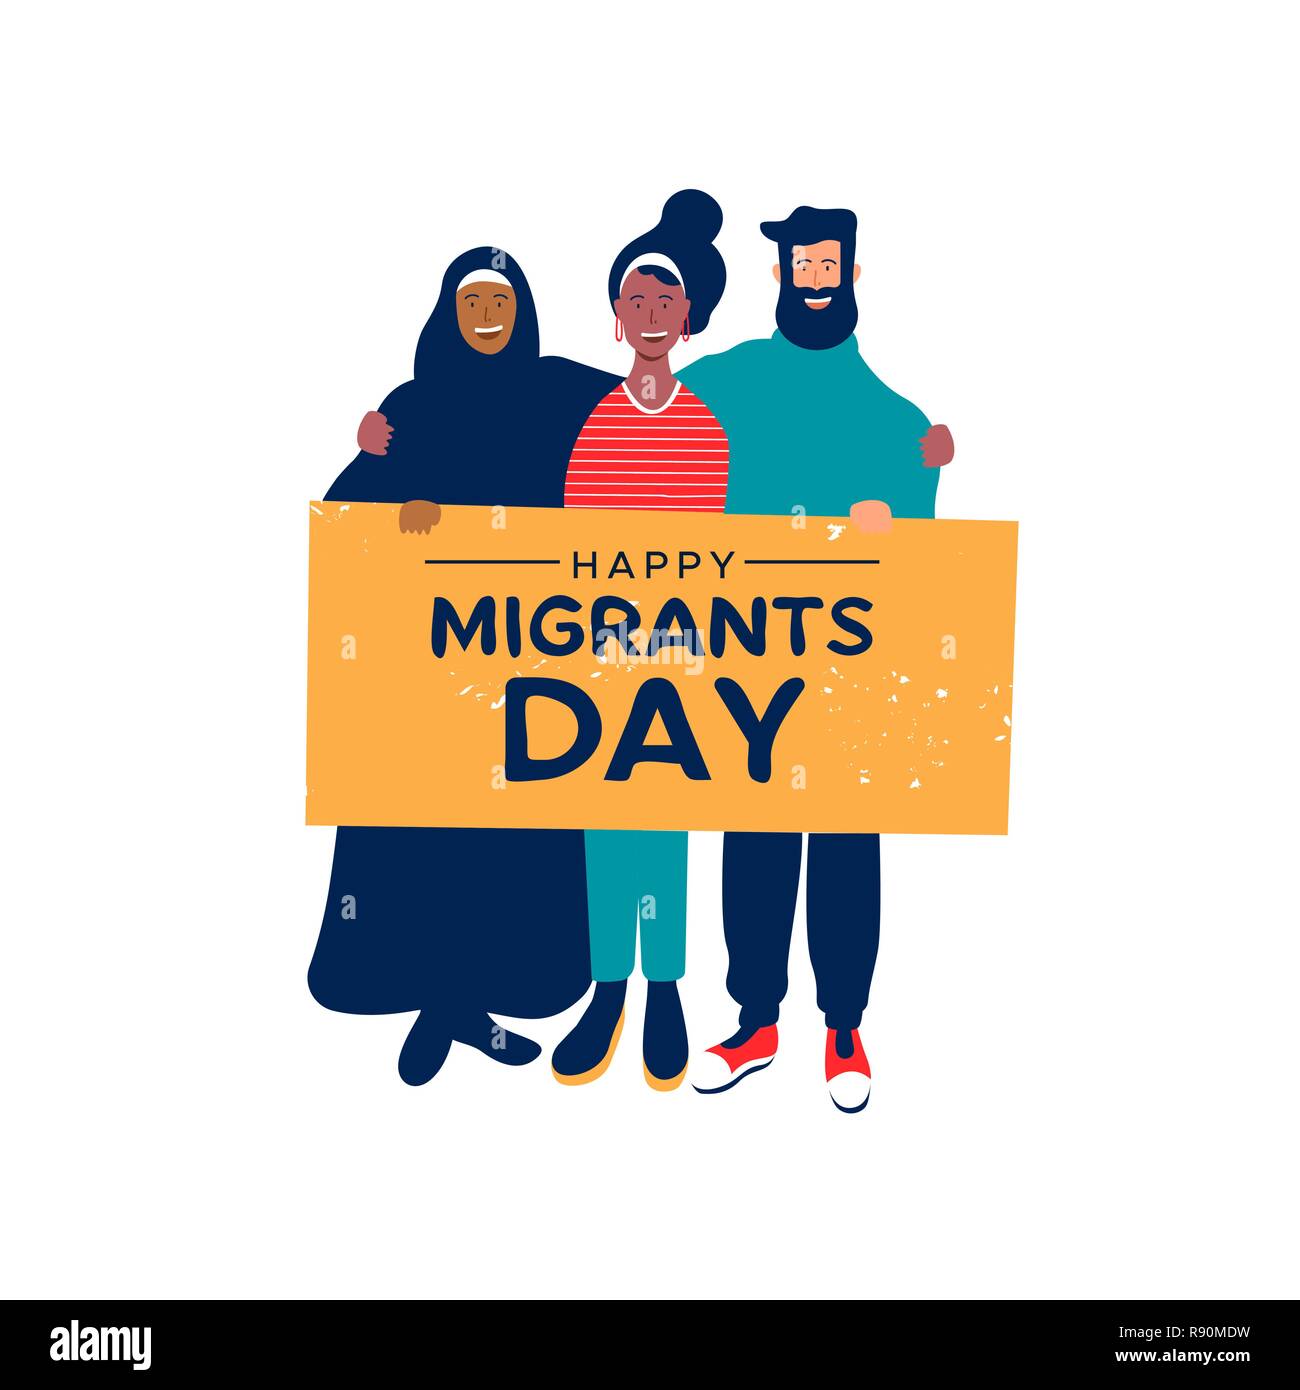 International Migrants Day background illustration, diverse people group from different cultures holding protest sign for gobal migration or refugee h Stock Vector